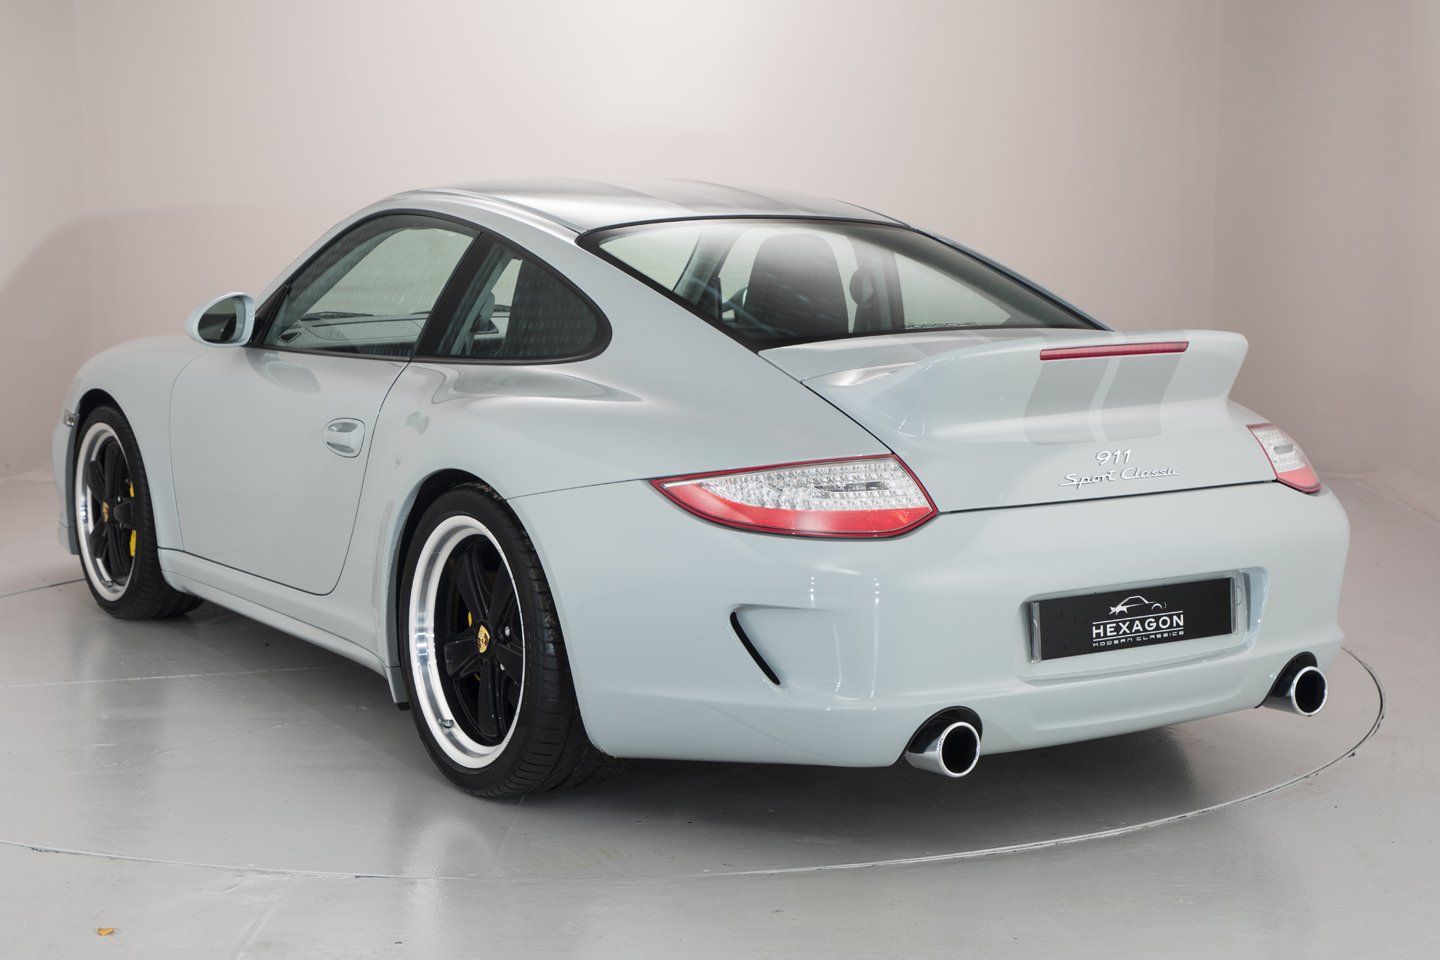 An 80-Mile 2010 Porsche 911 Sport Classic Is Up for Sale | DriveMag Cars